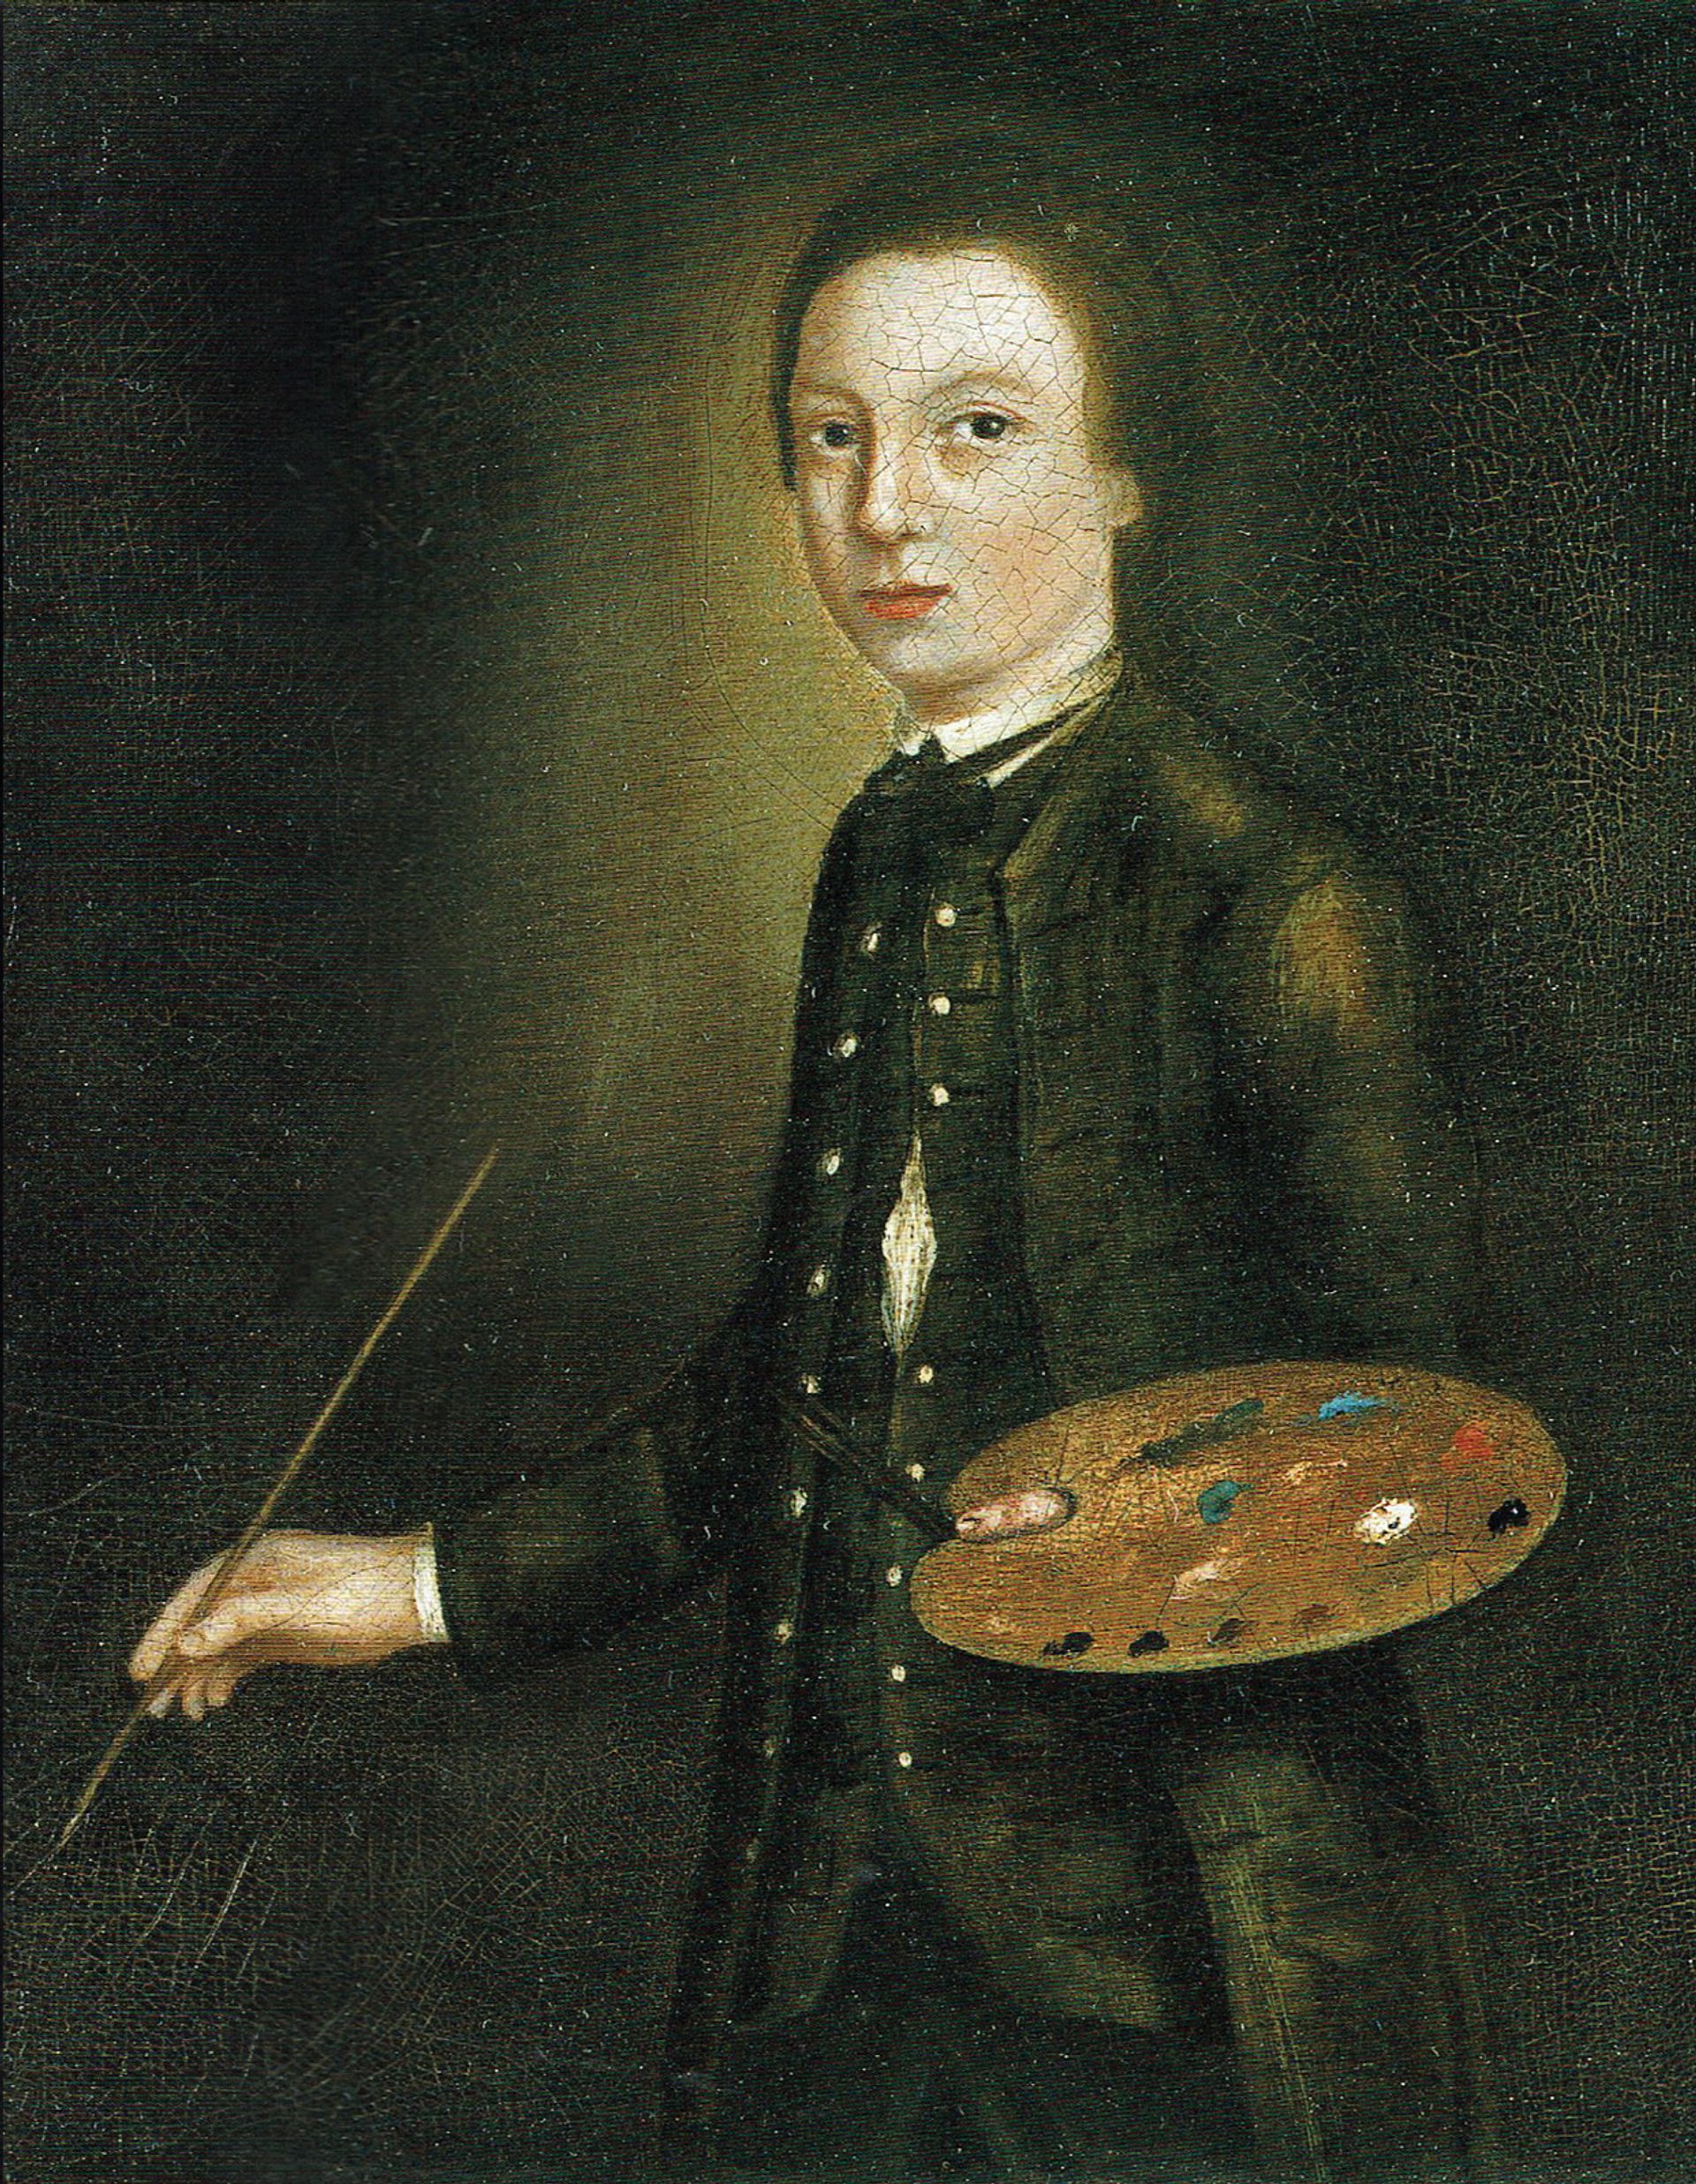 A self-portrait of the artist aged 12 (around 1739-40), attributed to Thomas Gainsborough. Private collection Exhibited in Tate’s 2003 Gainsborough exhibition